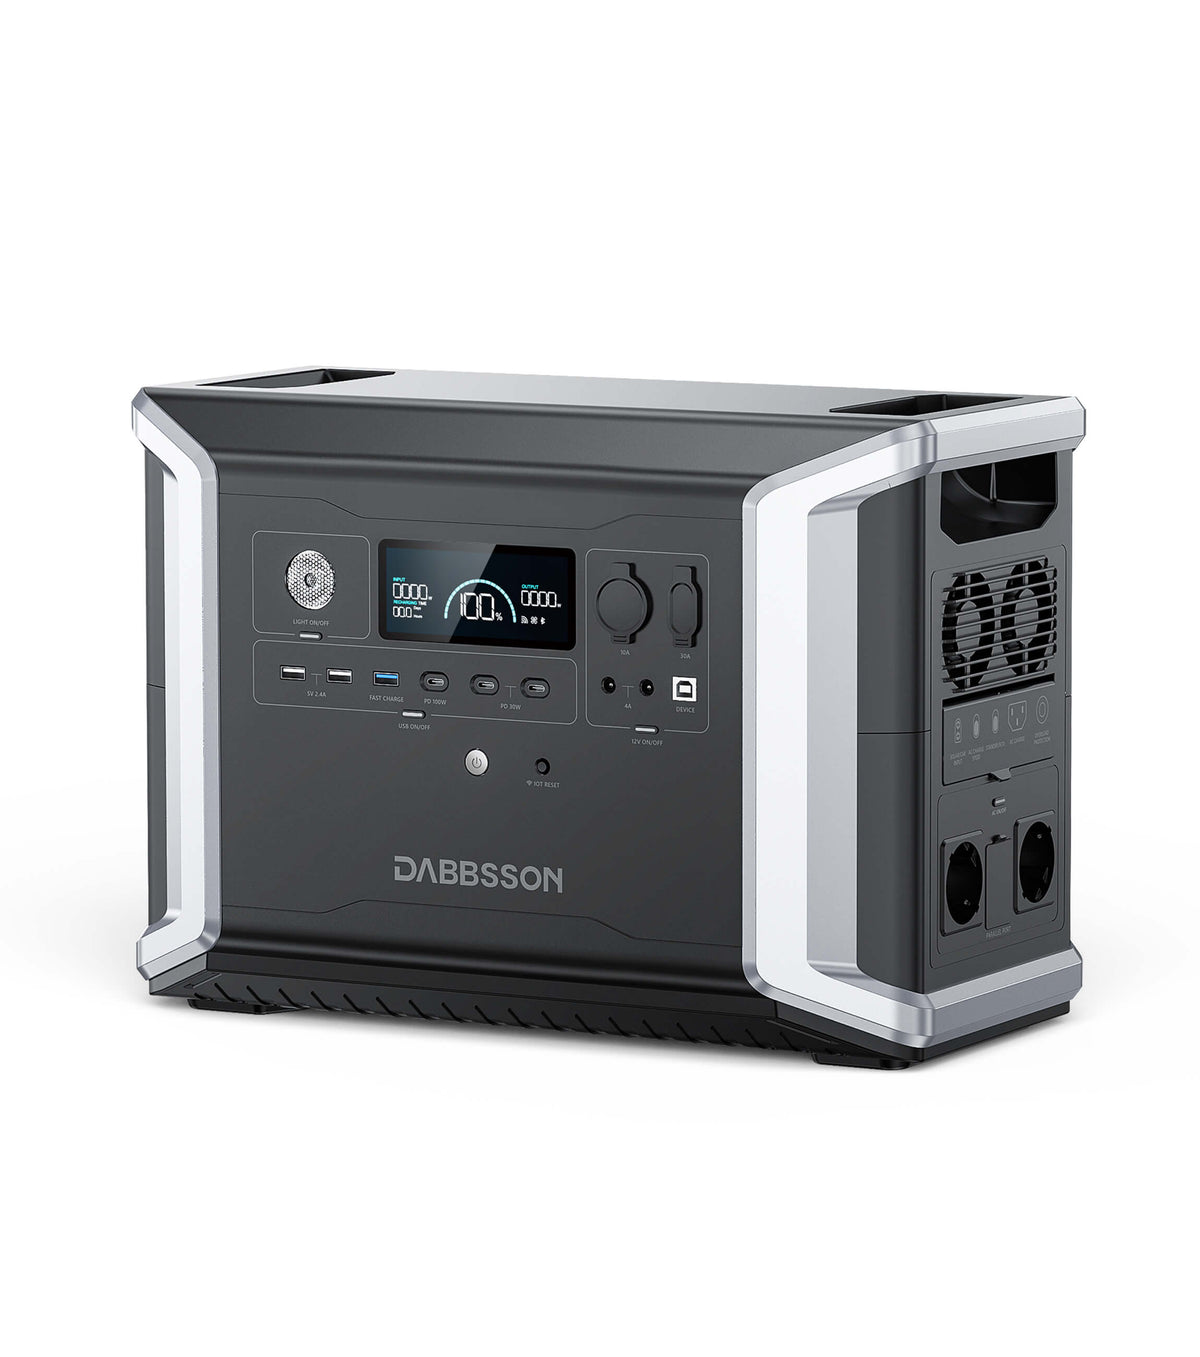 Dabbsson DBS2300 Solargenerator - 2330Wh | 2200W